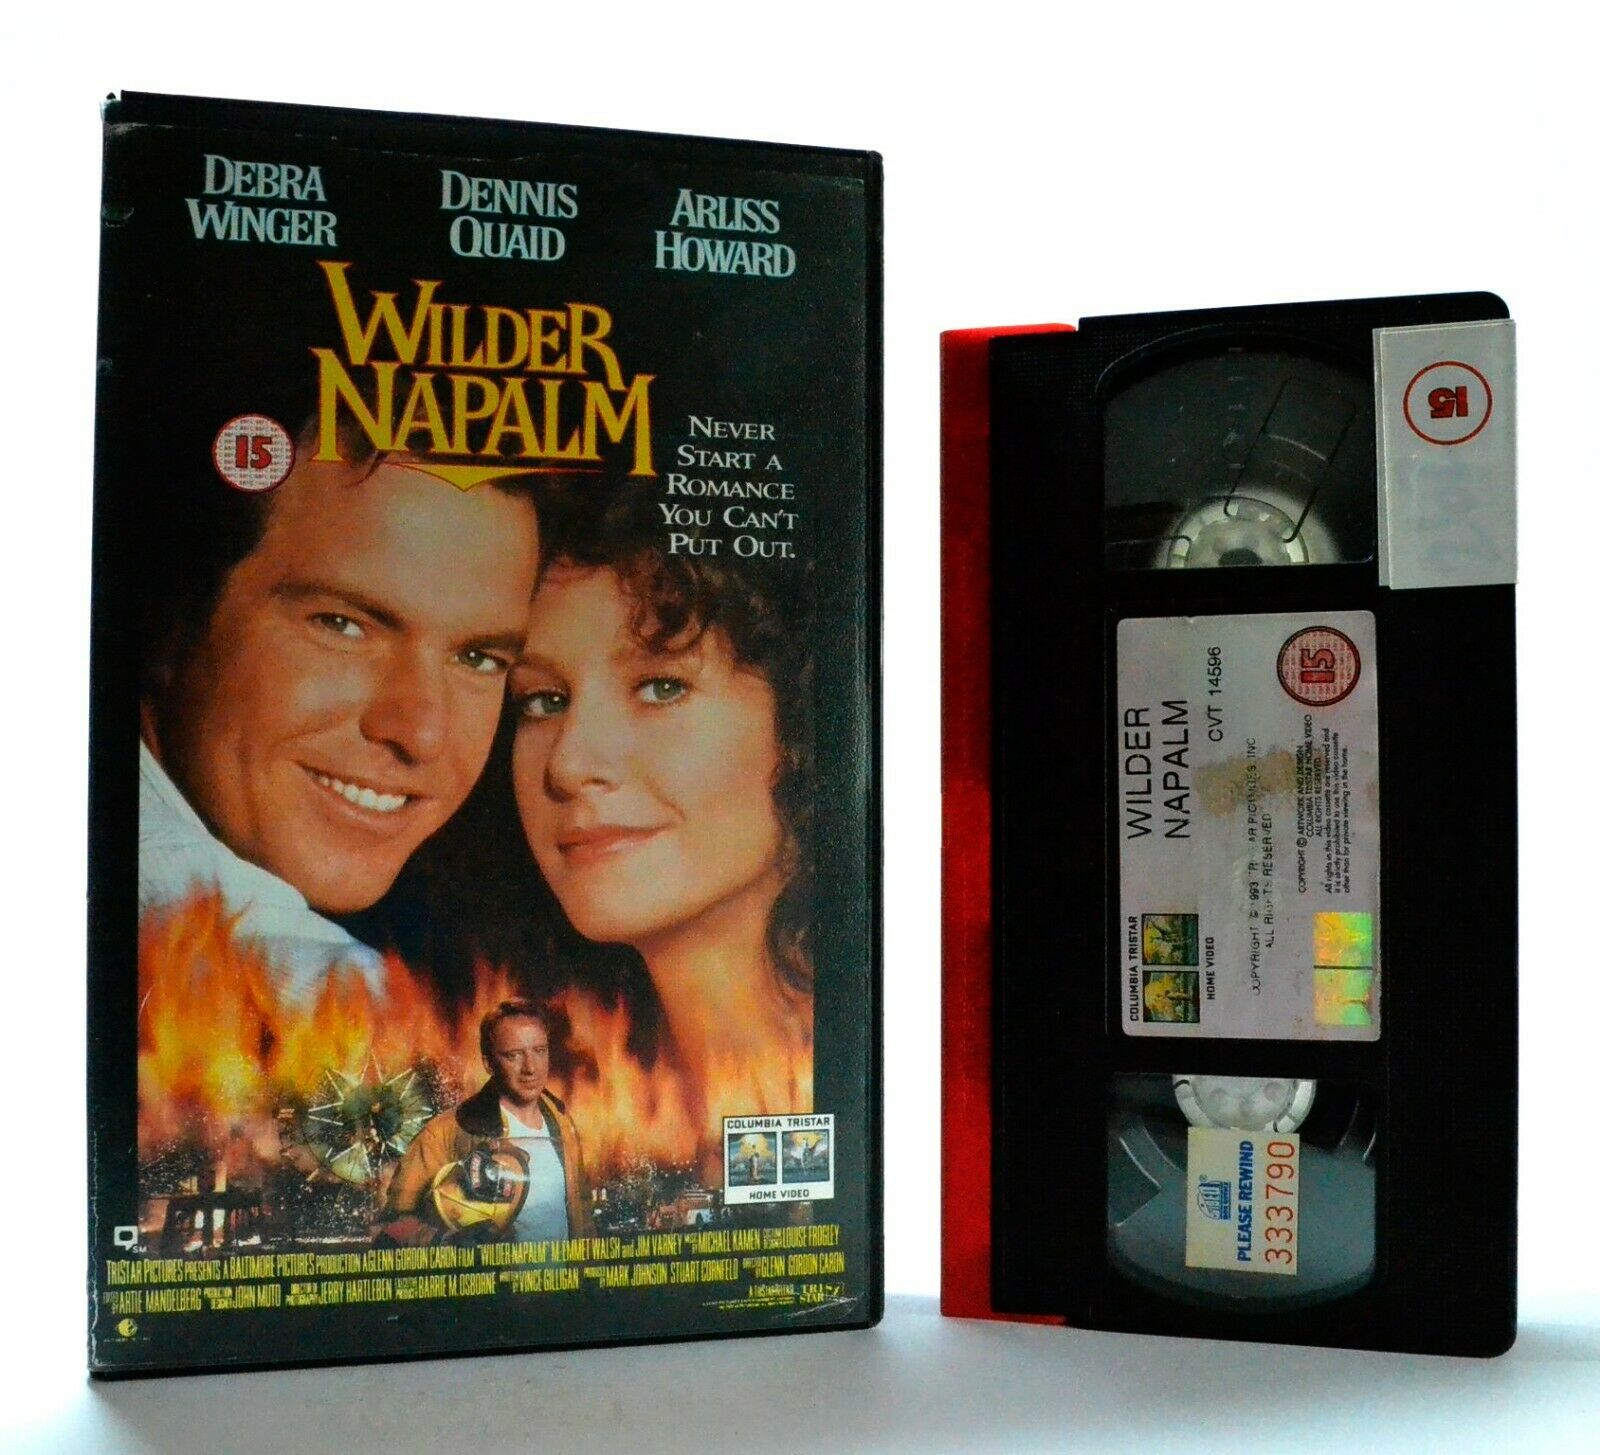 Wilder Napalm: Comedy - Brothers Rivalry For The Same Woman - Large Box - VHS-